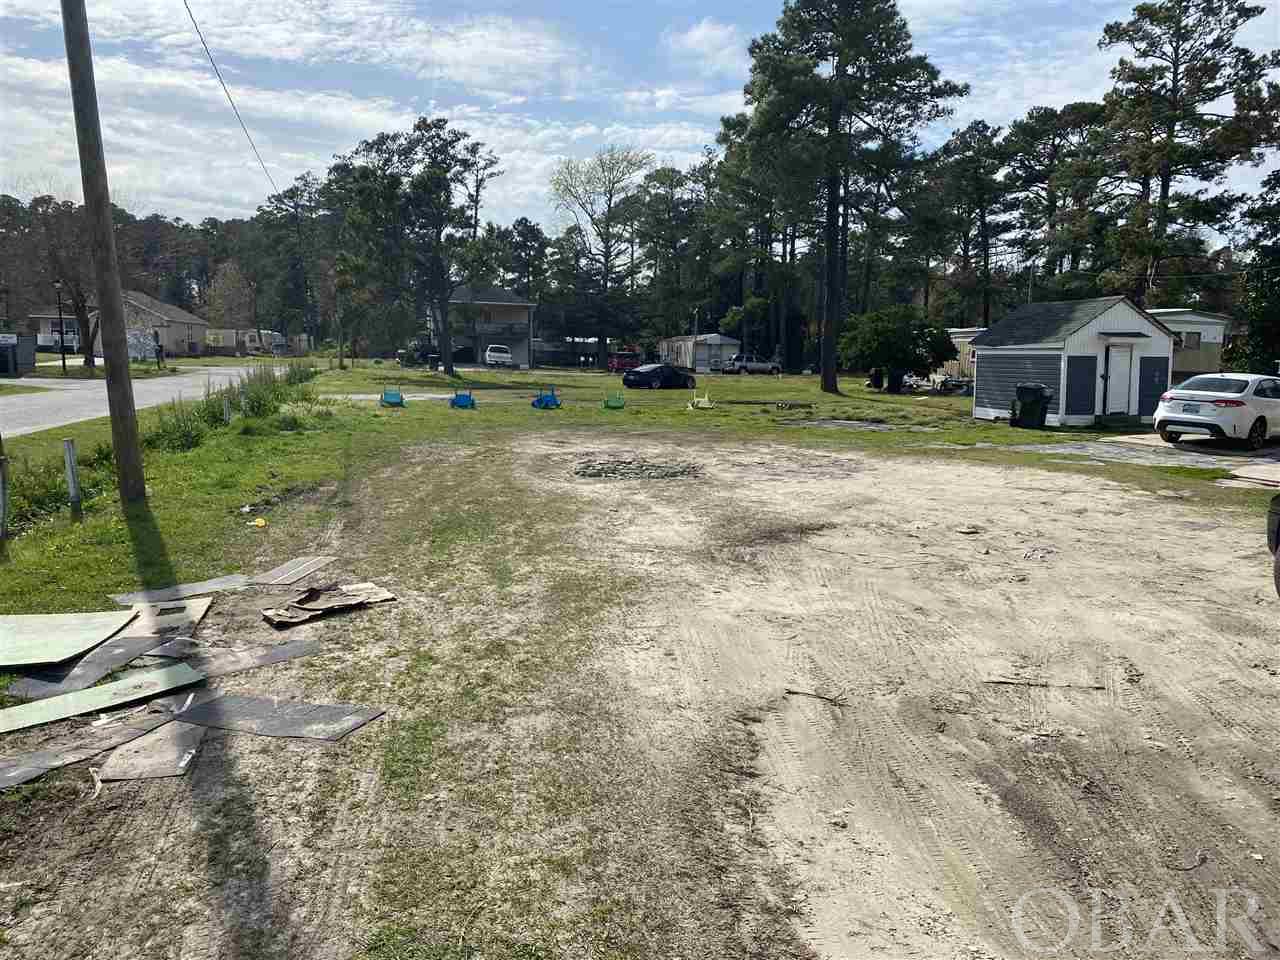 Large corner lot located on the highway 264 /64 within Manteo town limits.  Zoned commercial / res with high visibility for your business.Walking distance to Downtown Manteo, Restaurants, schools, shops, marina, etc.